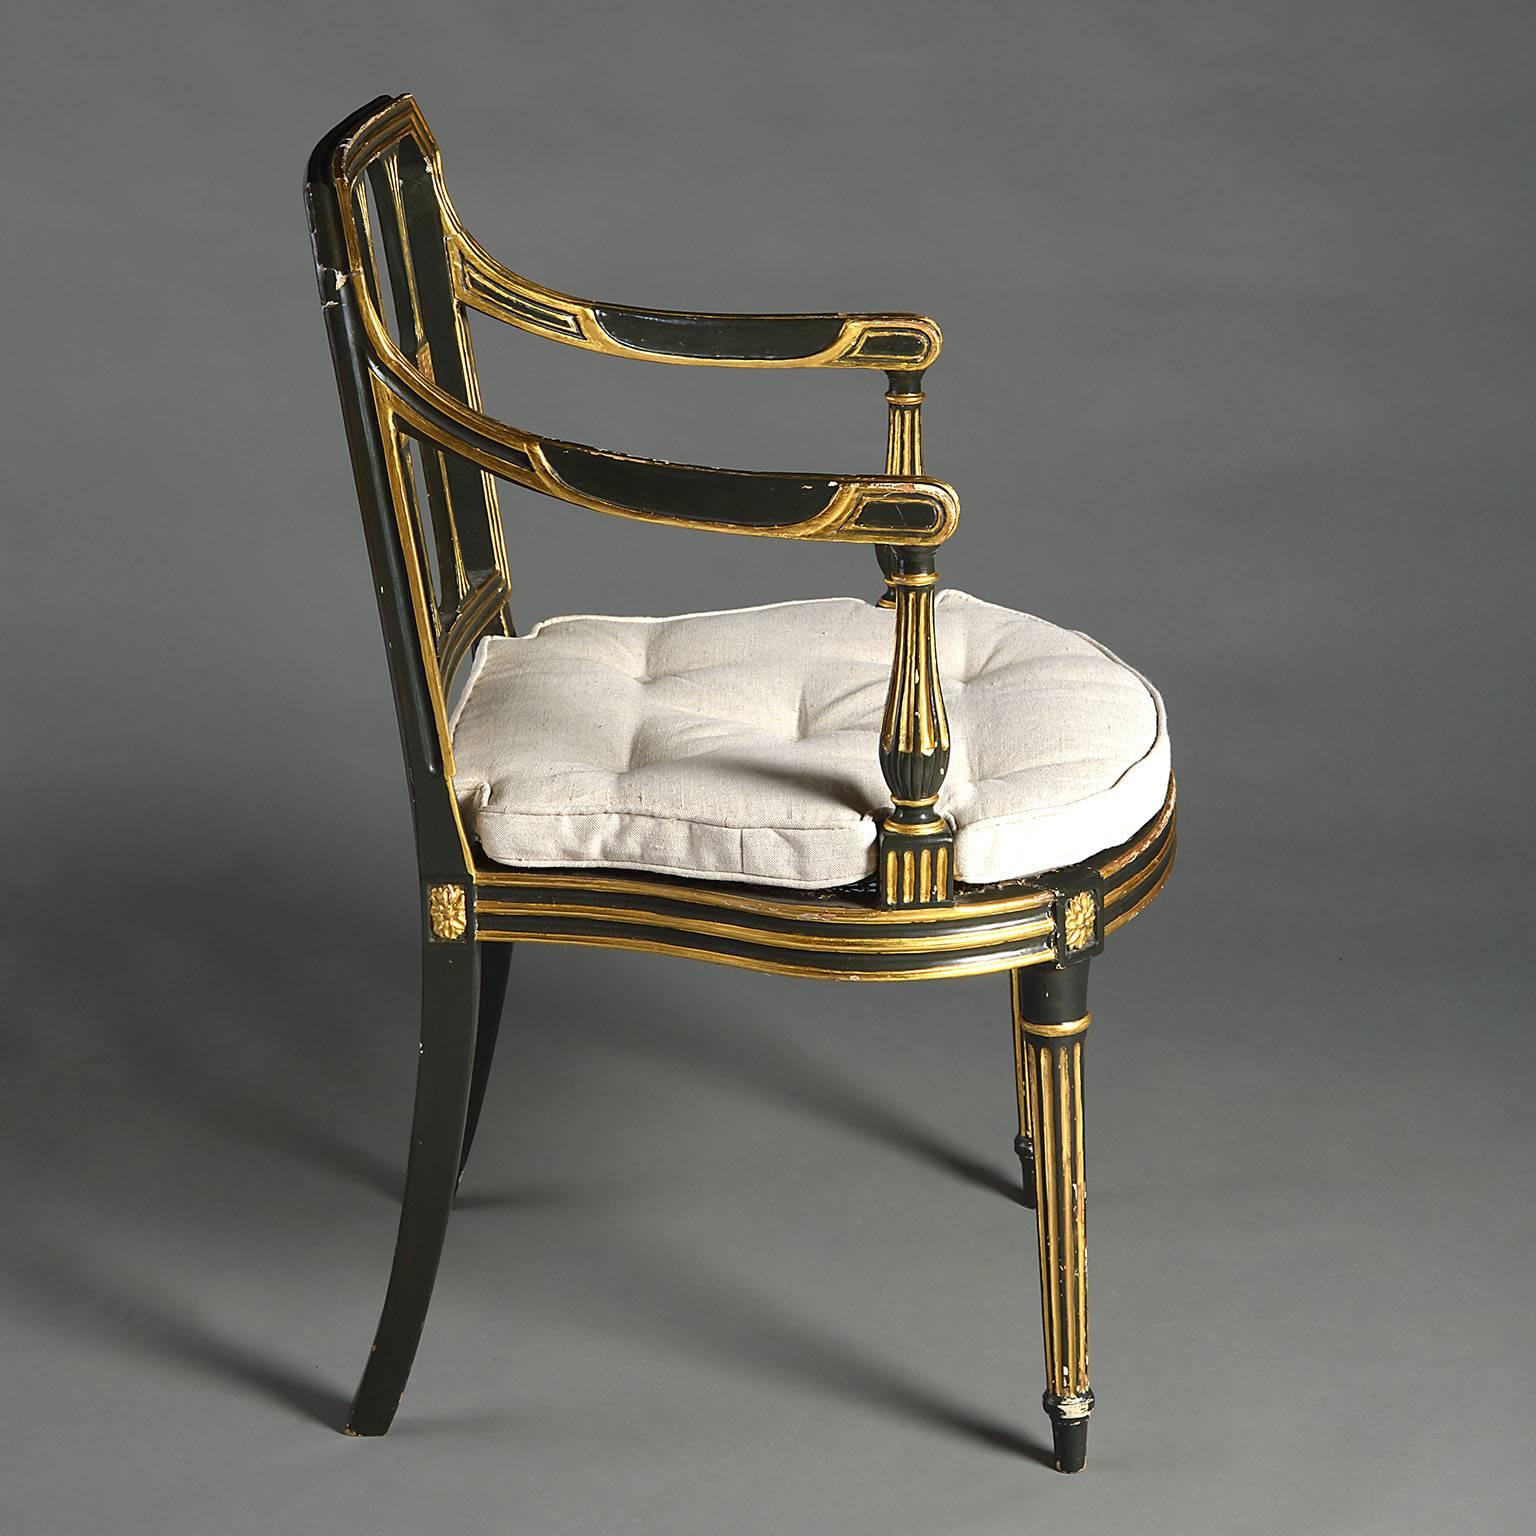 English Early 19th Century Ebonized and Gilded Armchair